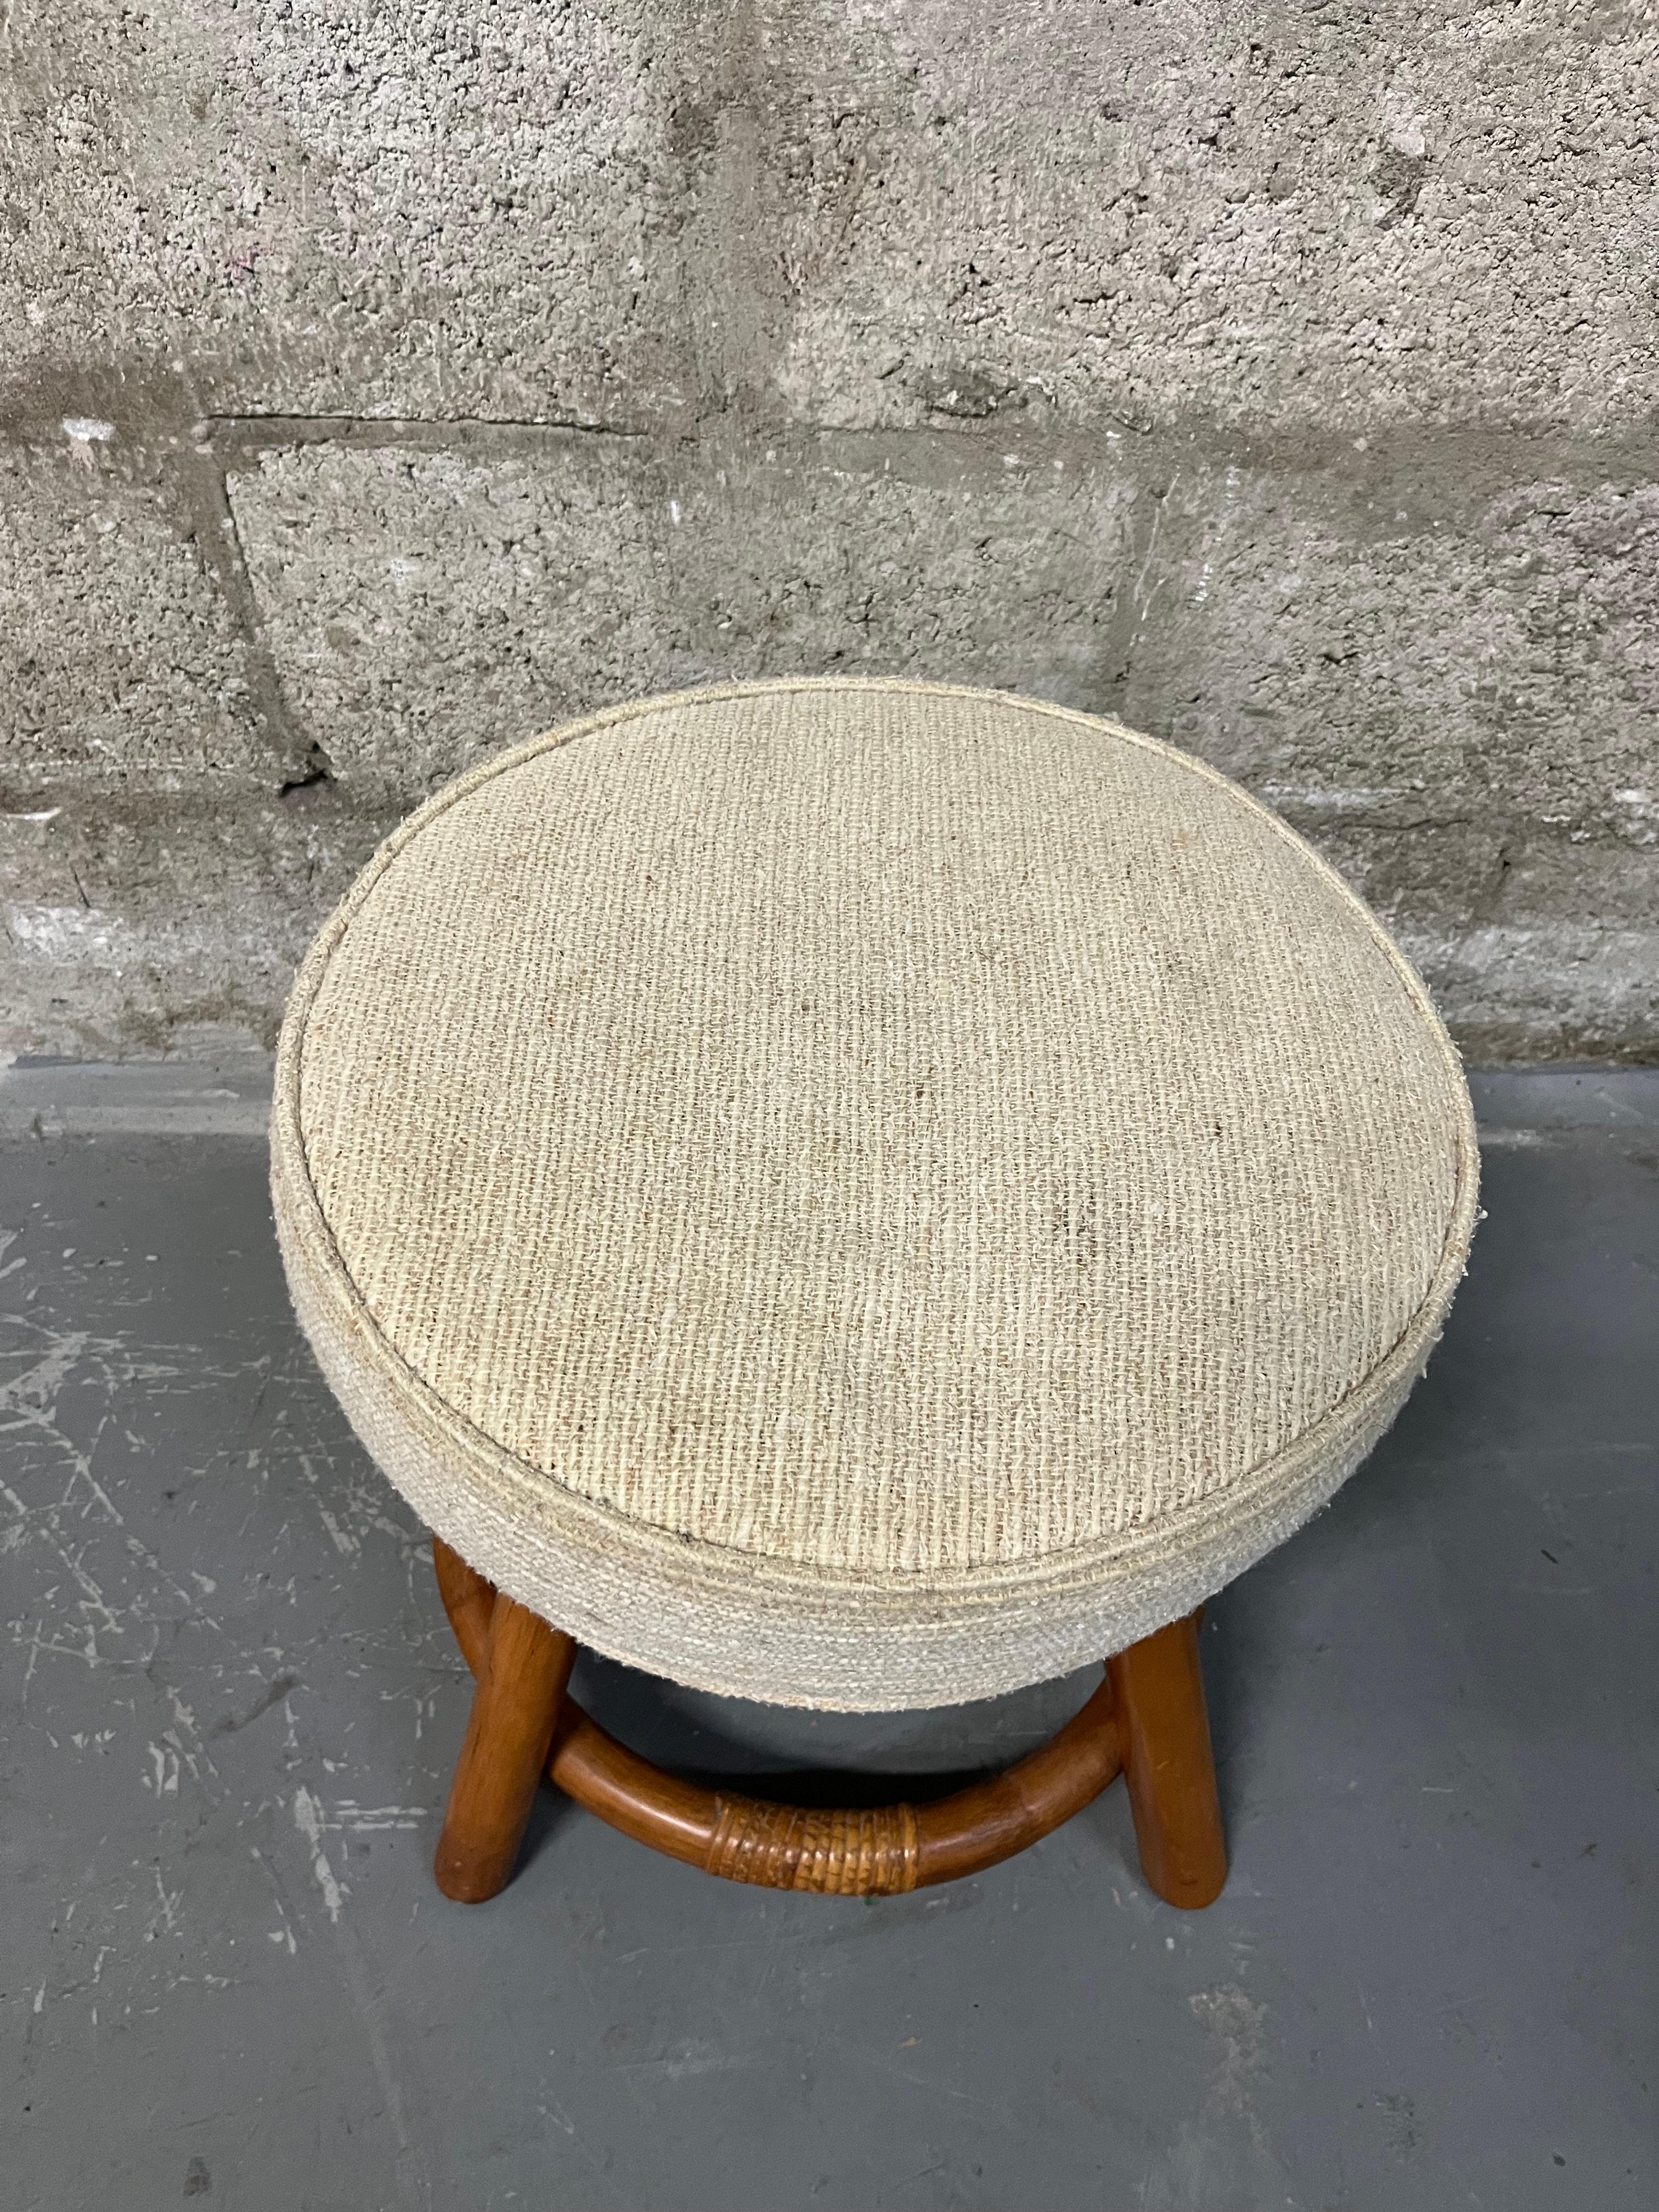 Bamboo Rattan Wicker Swivel Footstool in the Paul Frankl's Style. Circa 1970s  For Sale 5